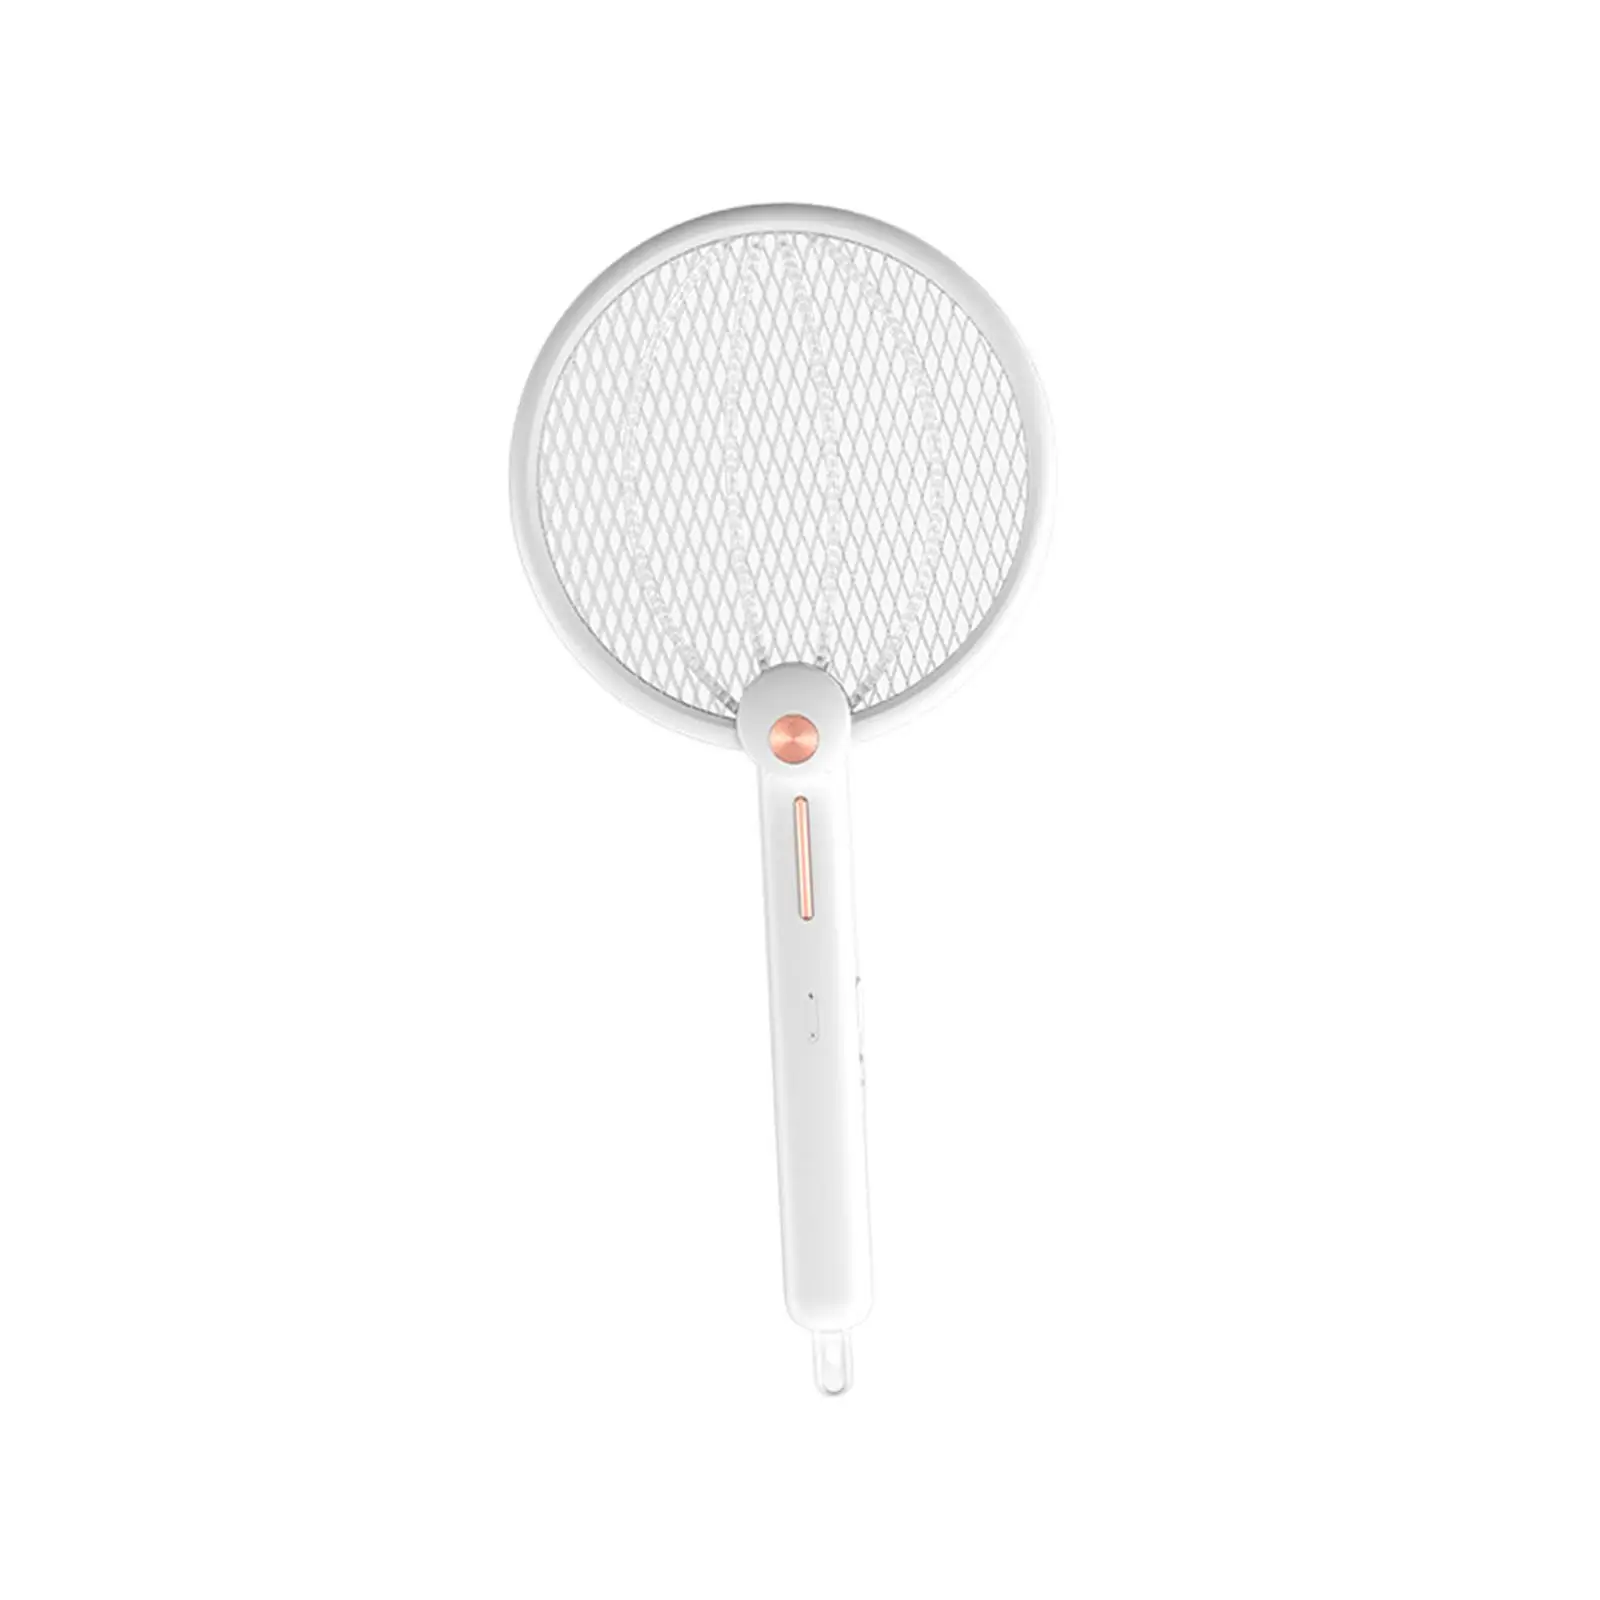 Fly traps Lamp with 3 mesh Handheld 2 in 1 USB Folding Electric Fly Swatter Racket for Summer Indoor Home Office Outdoor